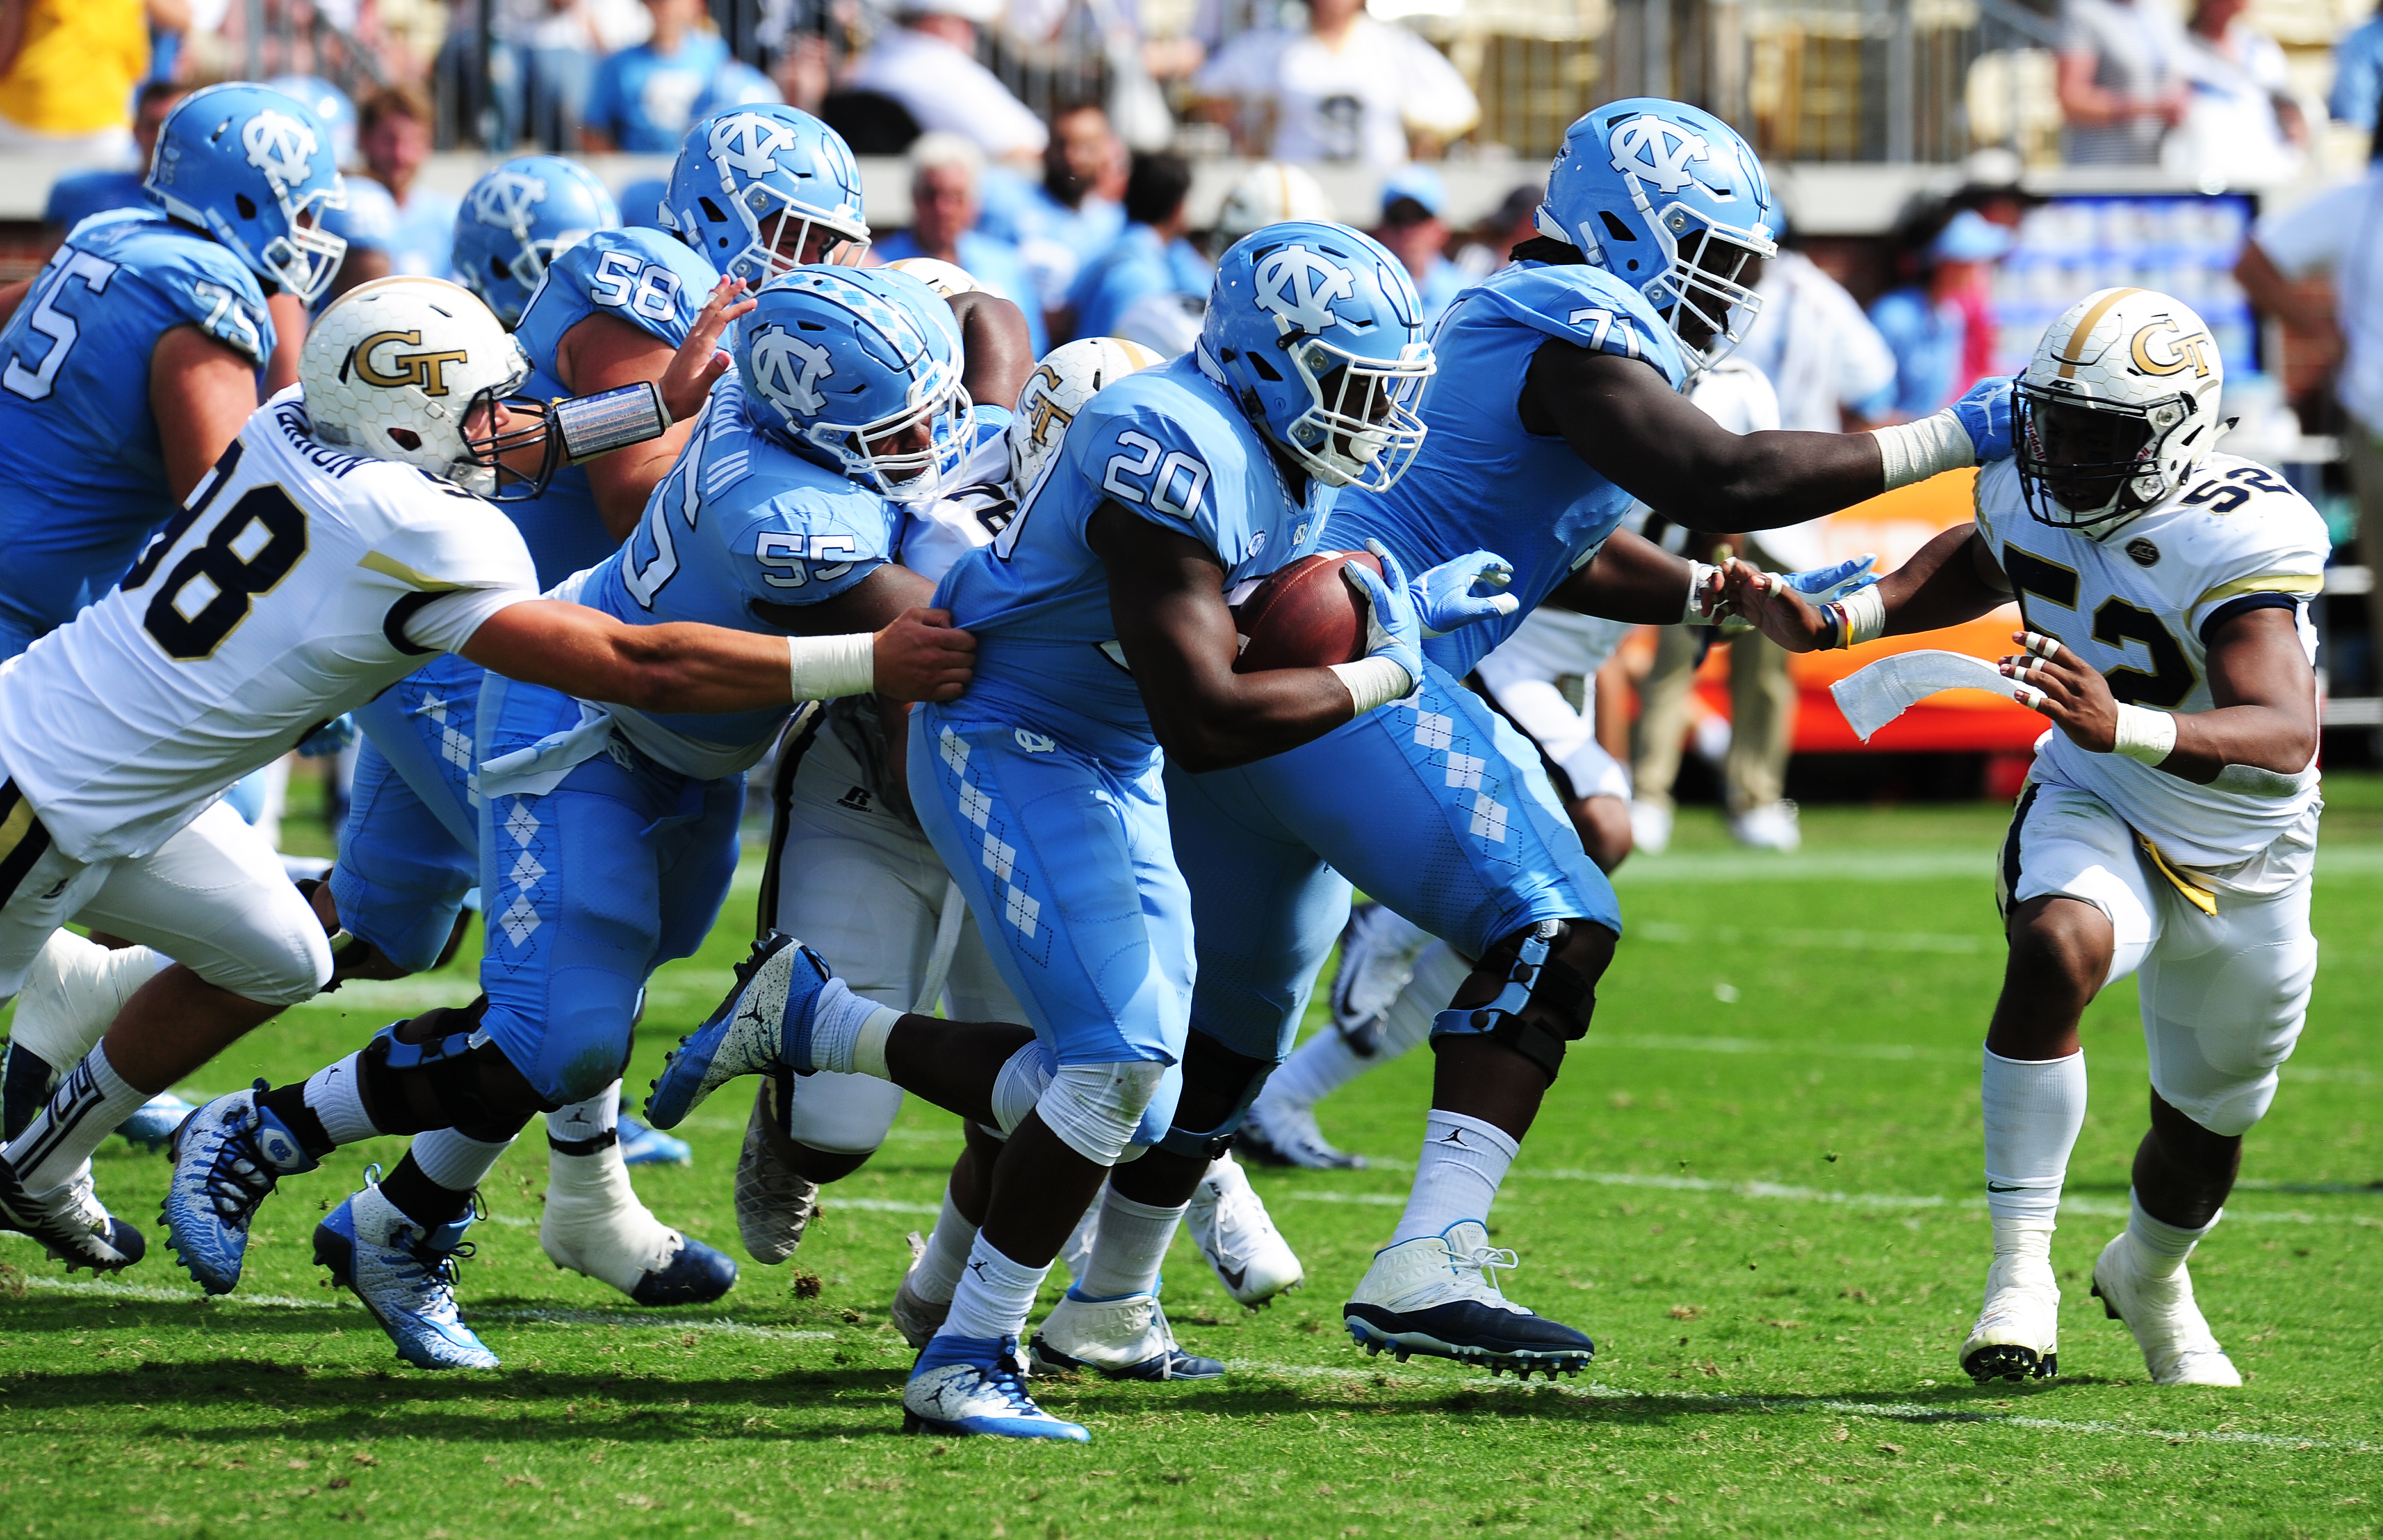 The 10 best school color combinations in college football | For The Win